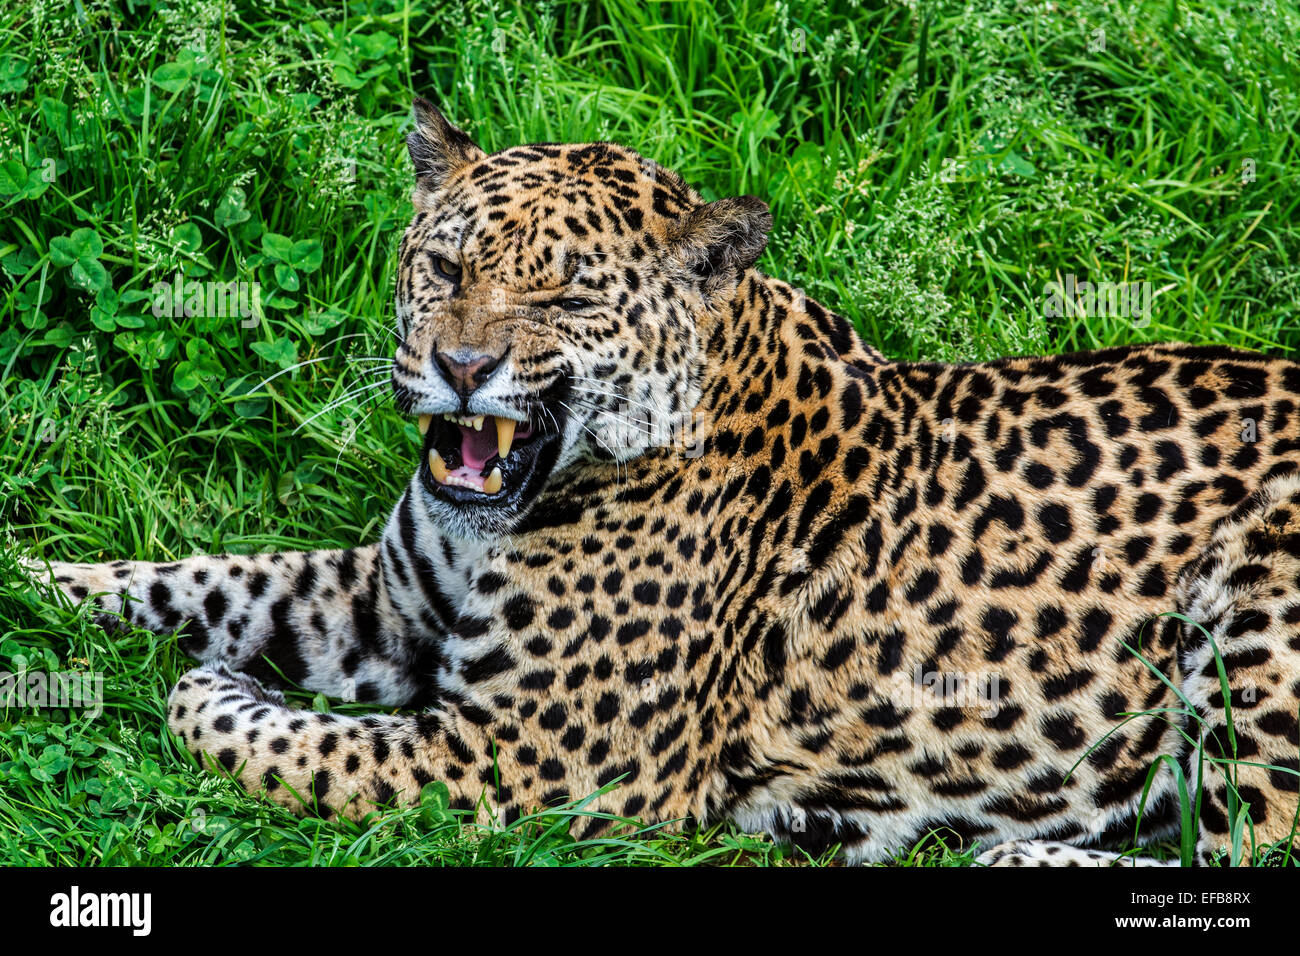 Close up of panther / jaguar (Panthera onca) growling in the grass, native to Central and South America Stock Photo